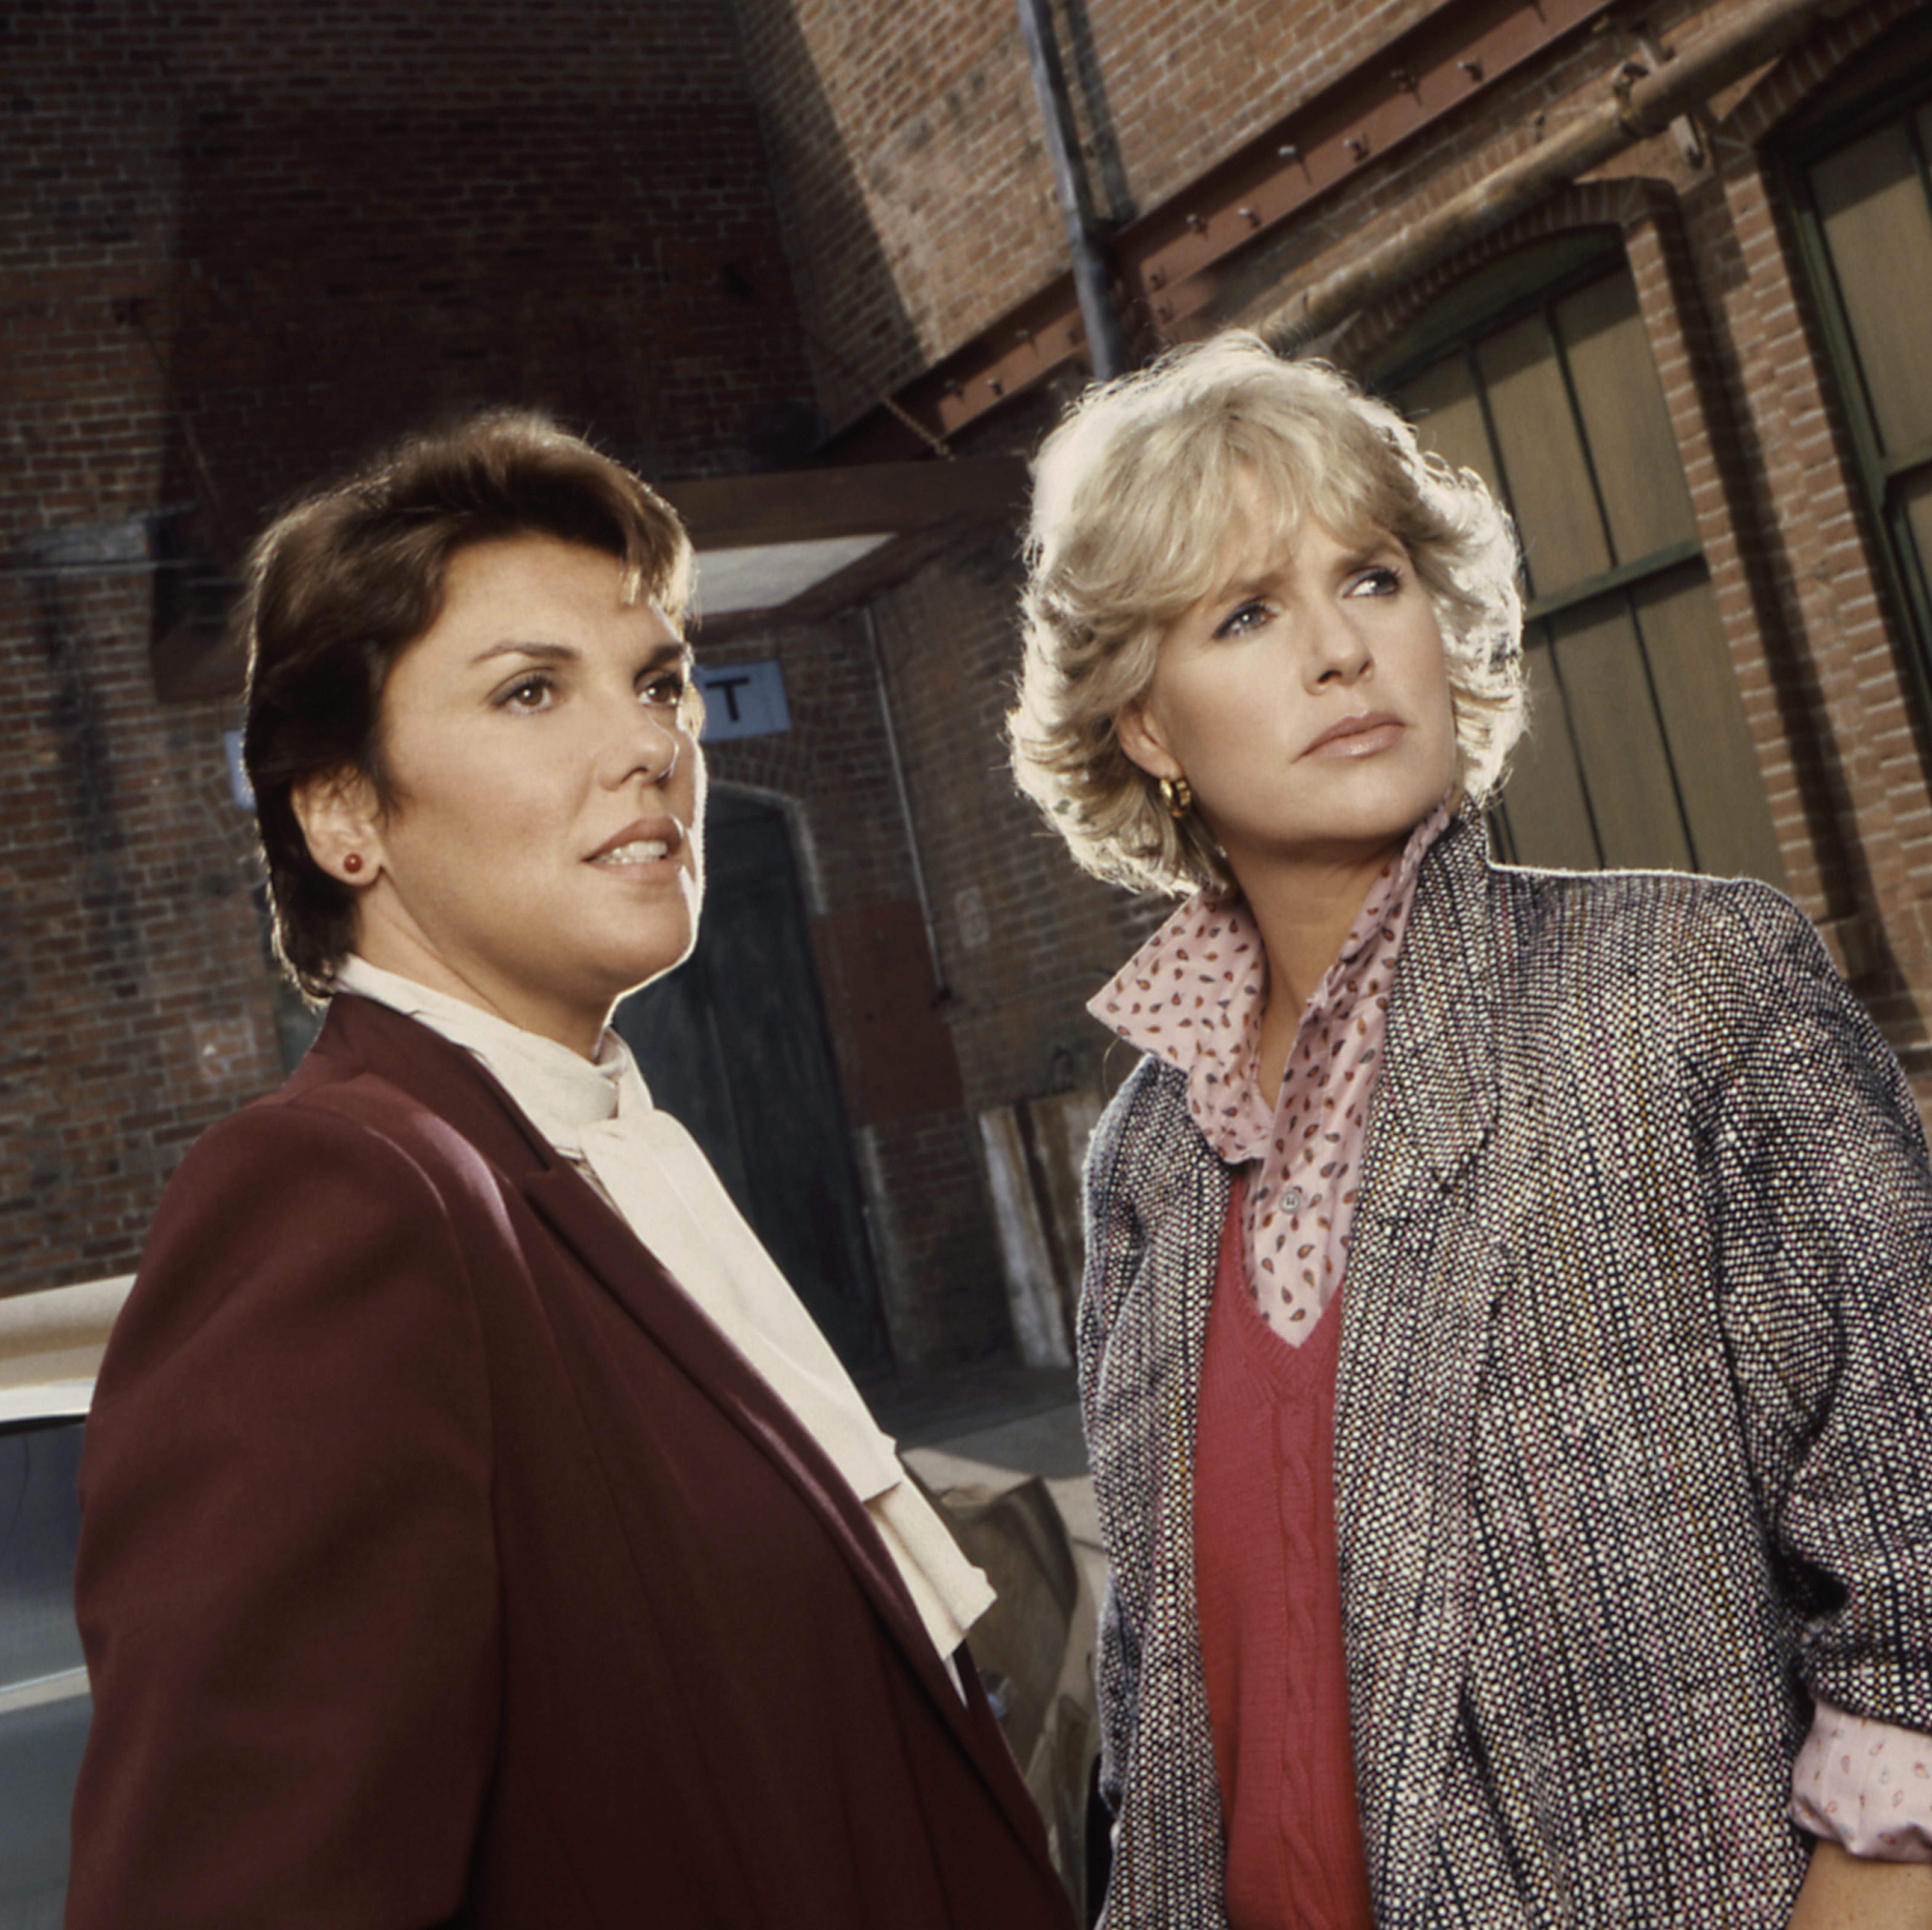 Tyne Daly and Sharon Gless on set of Cagney and Lacey, 1987